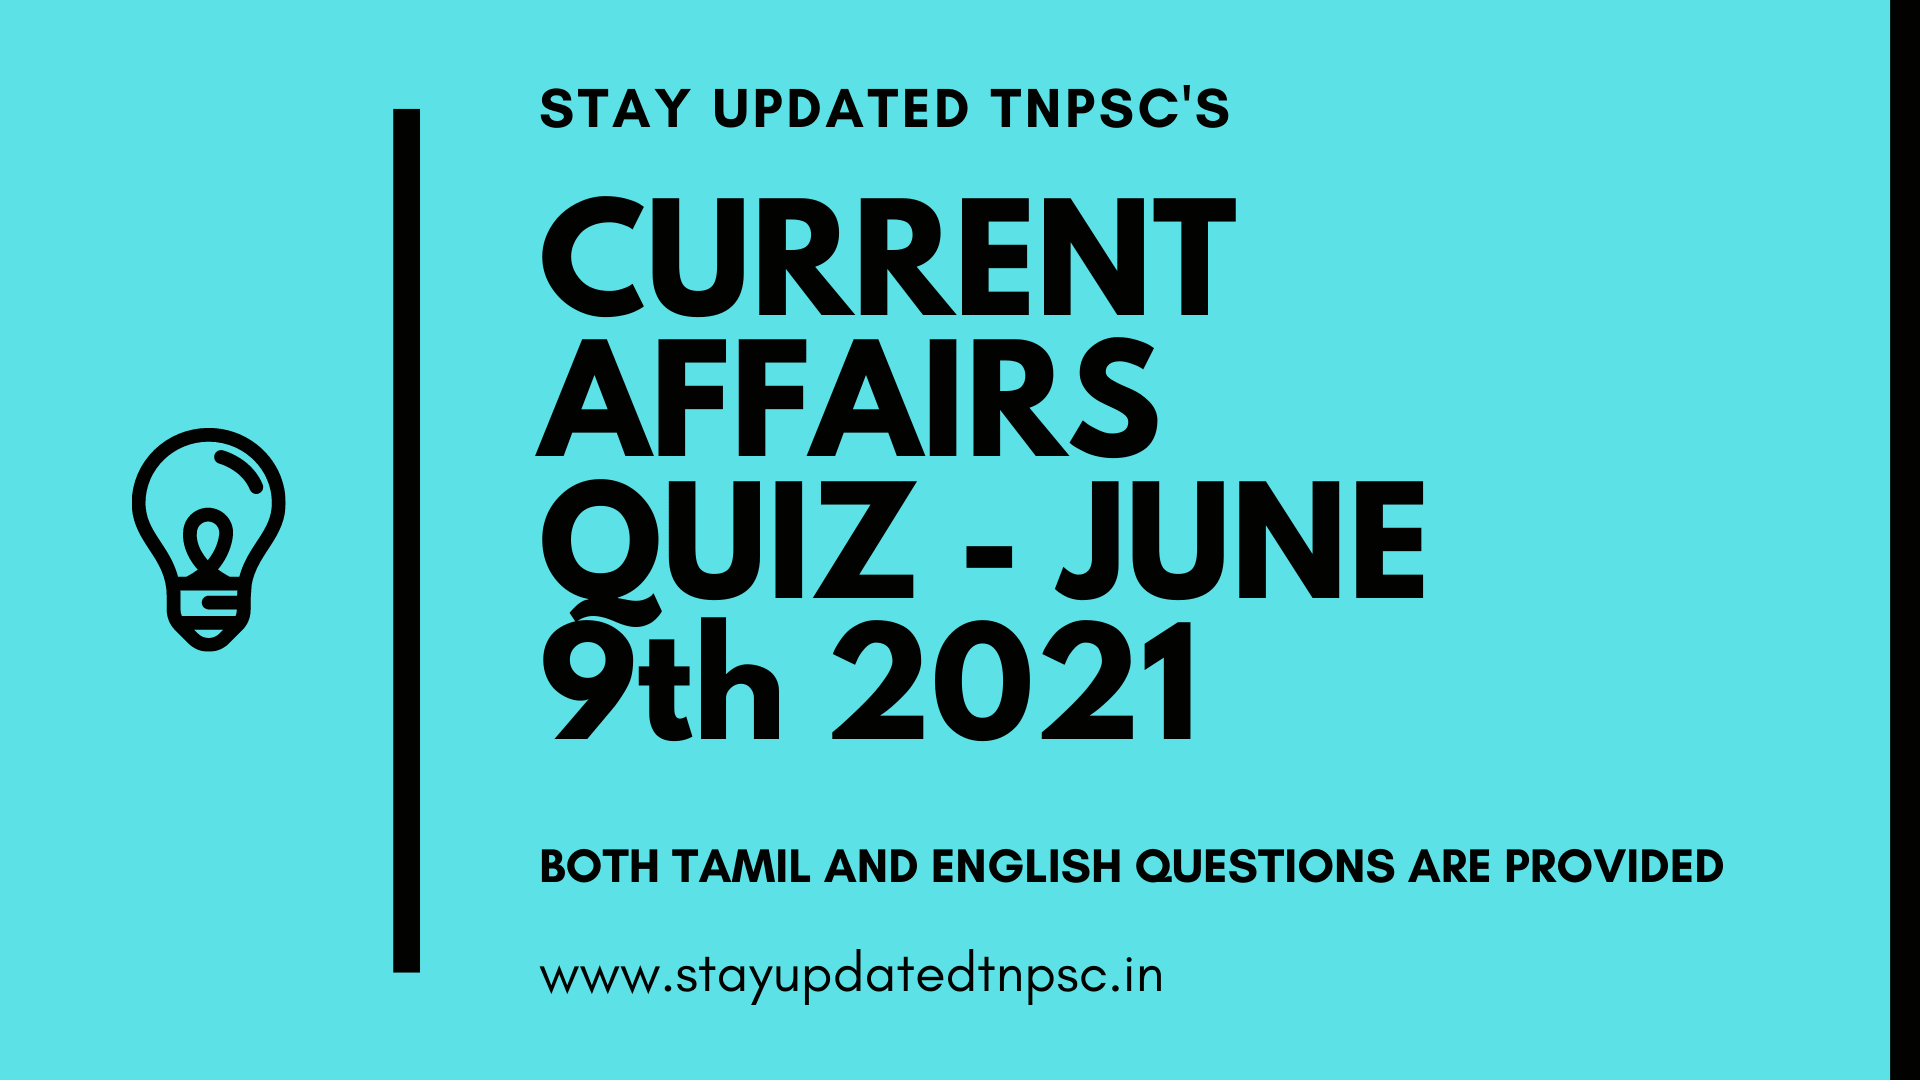 TNPSC DAILY CURRENT AFFAIRS: 09 JUNE 2021